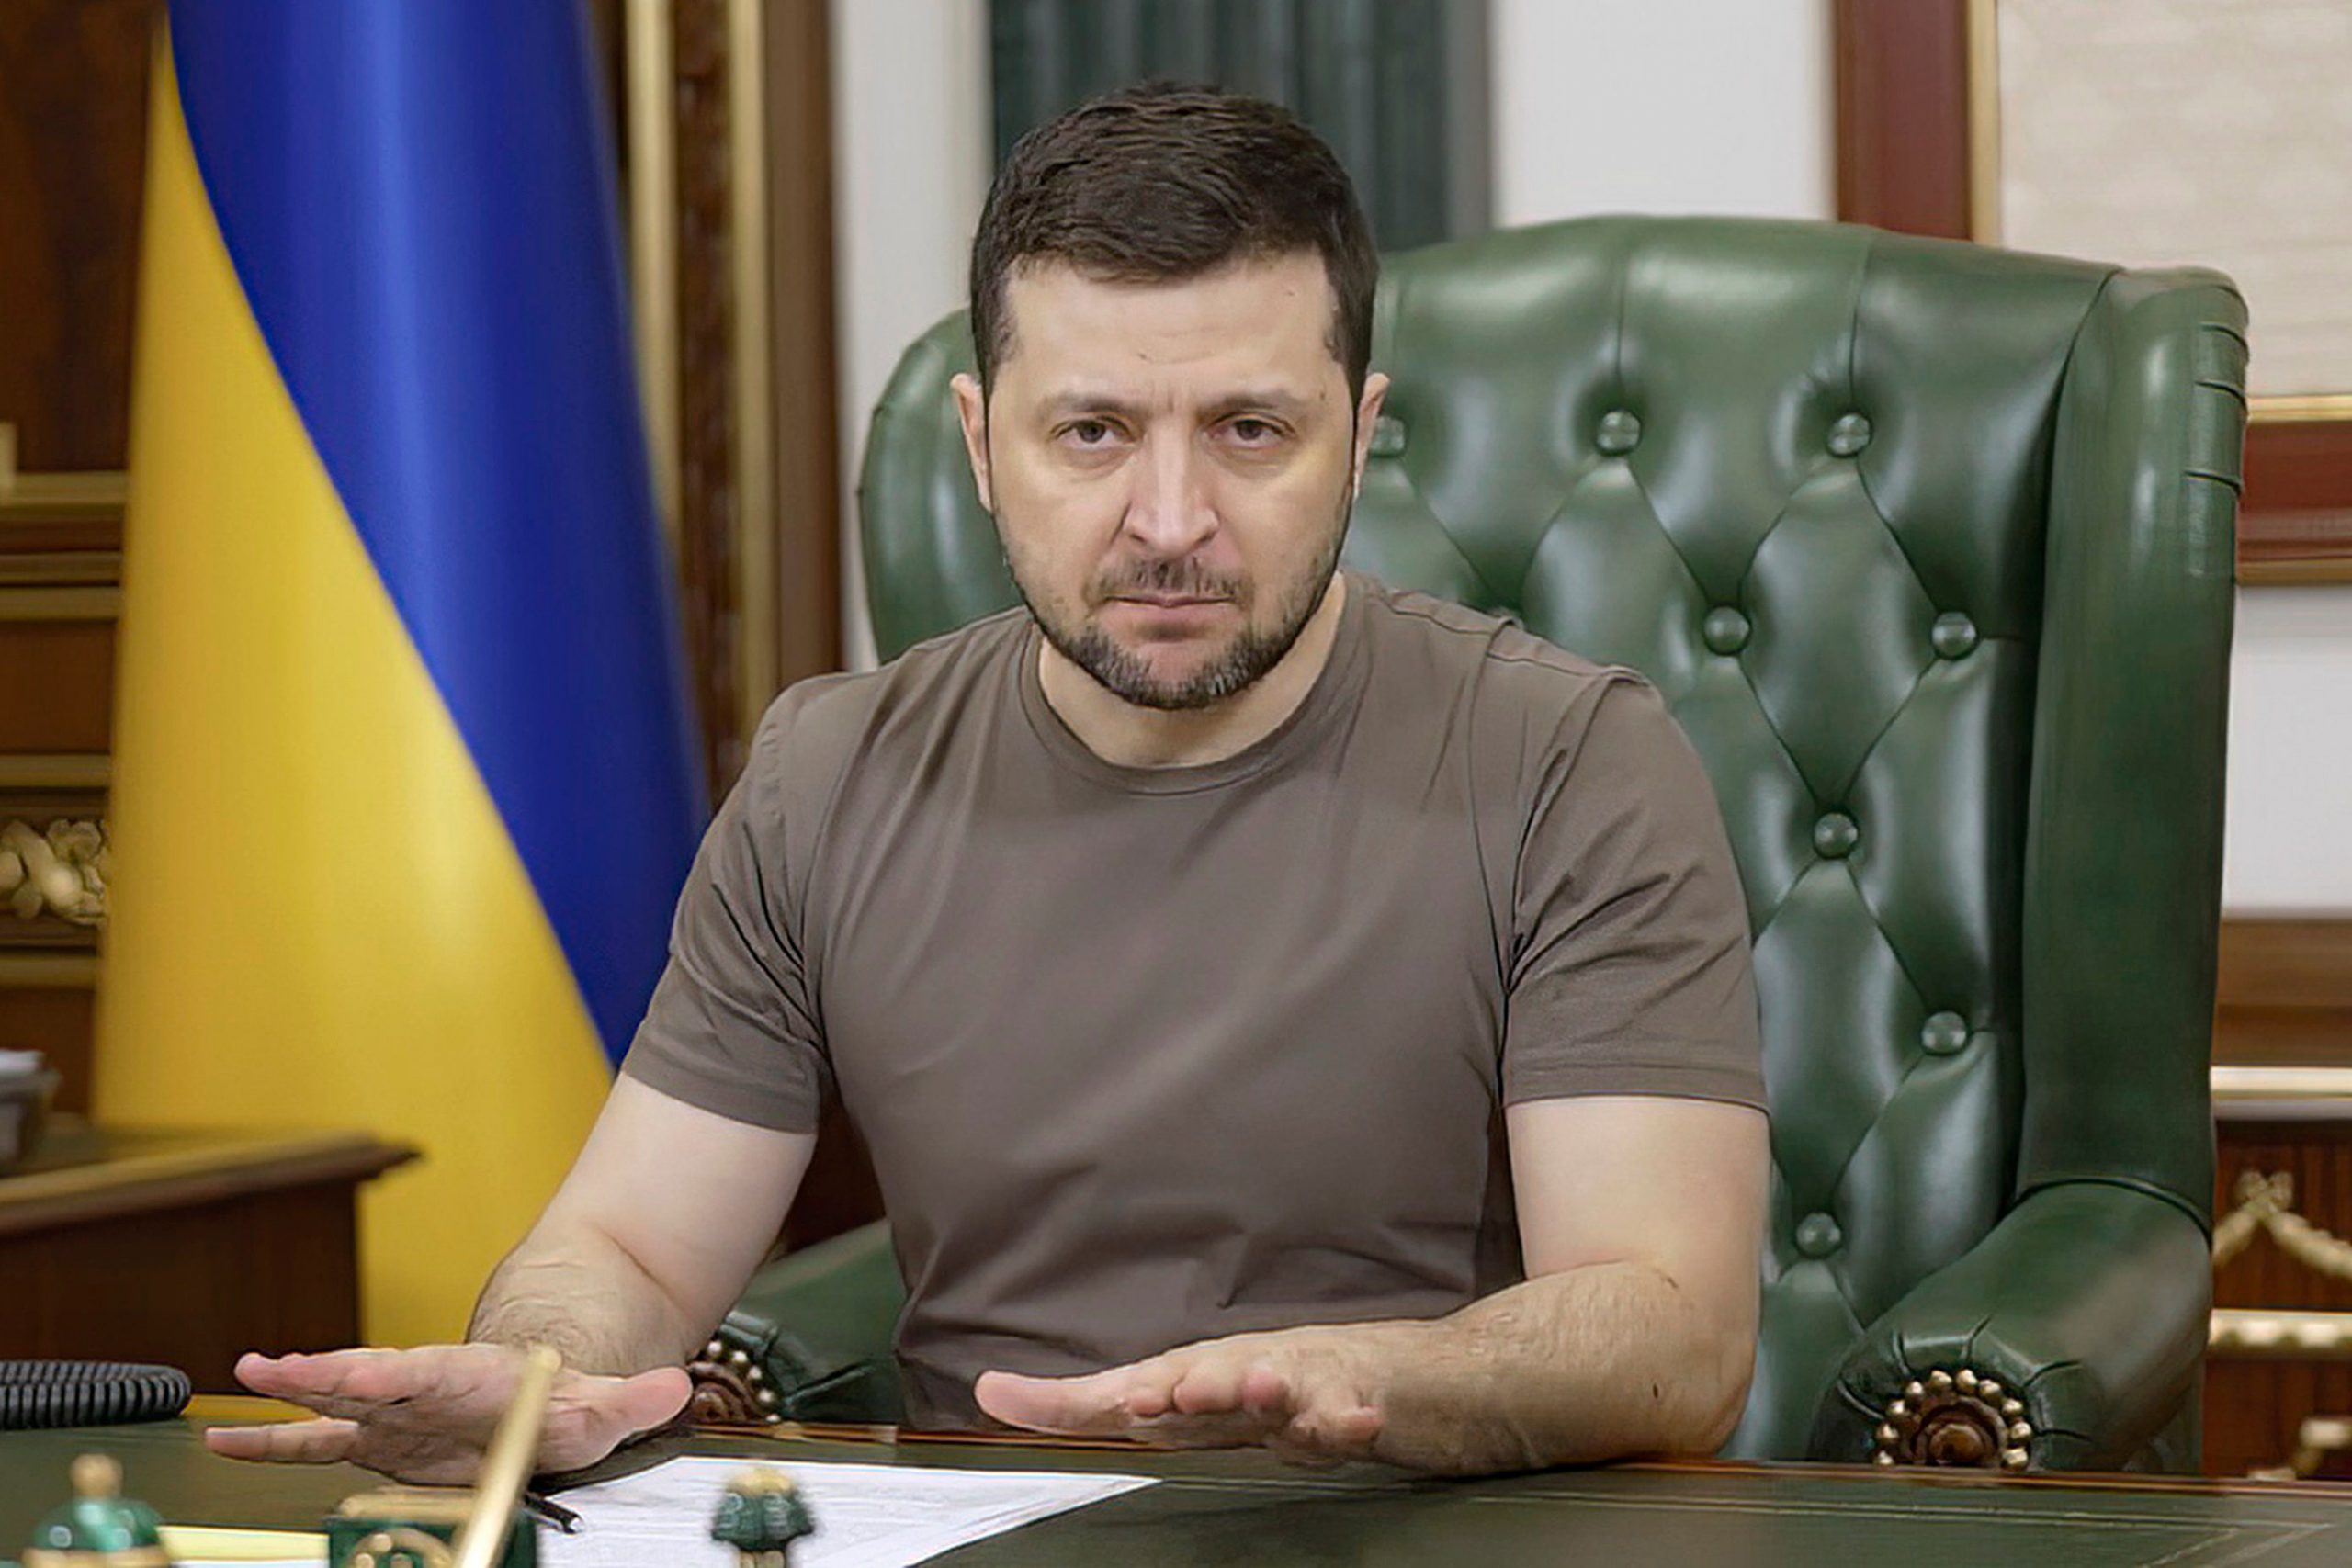 ‘Will fight for every metre of land’, says Zelensky amid Russian ‘pullback’